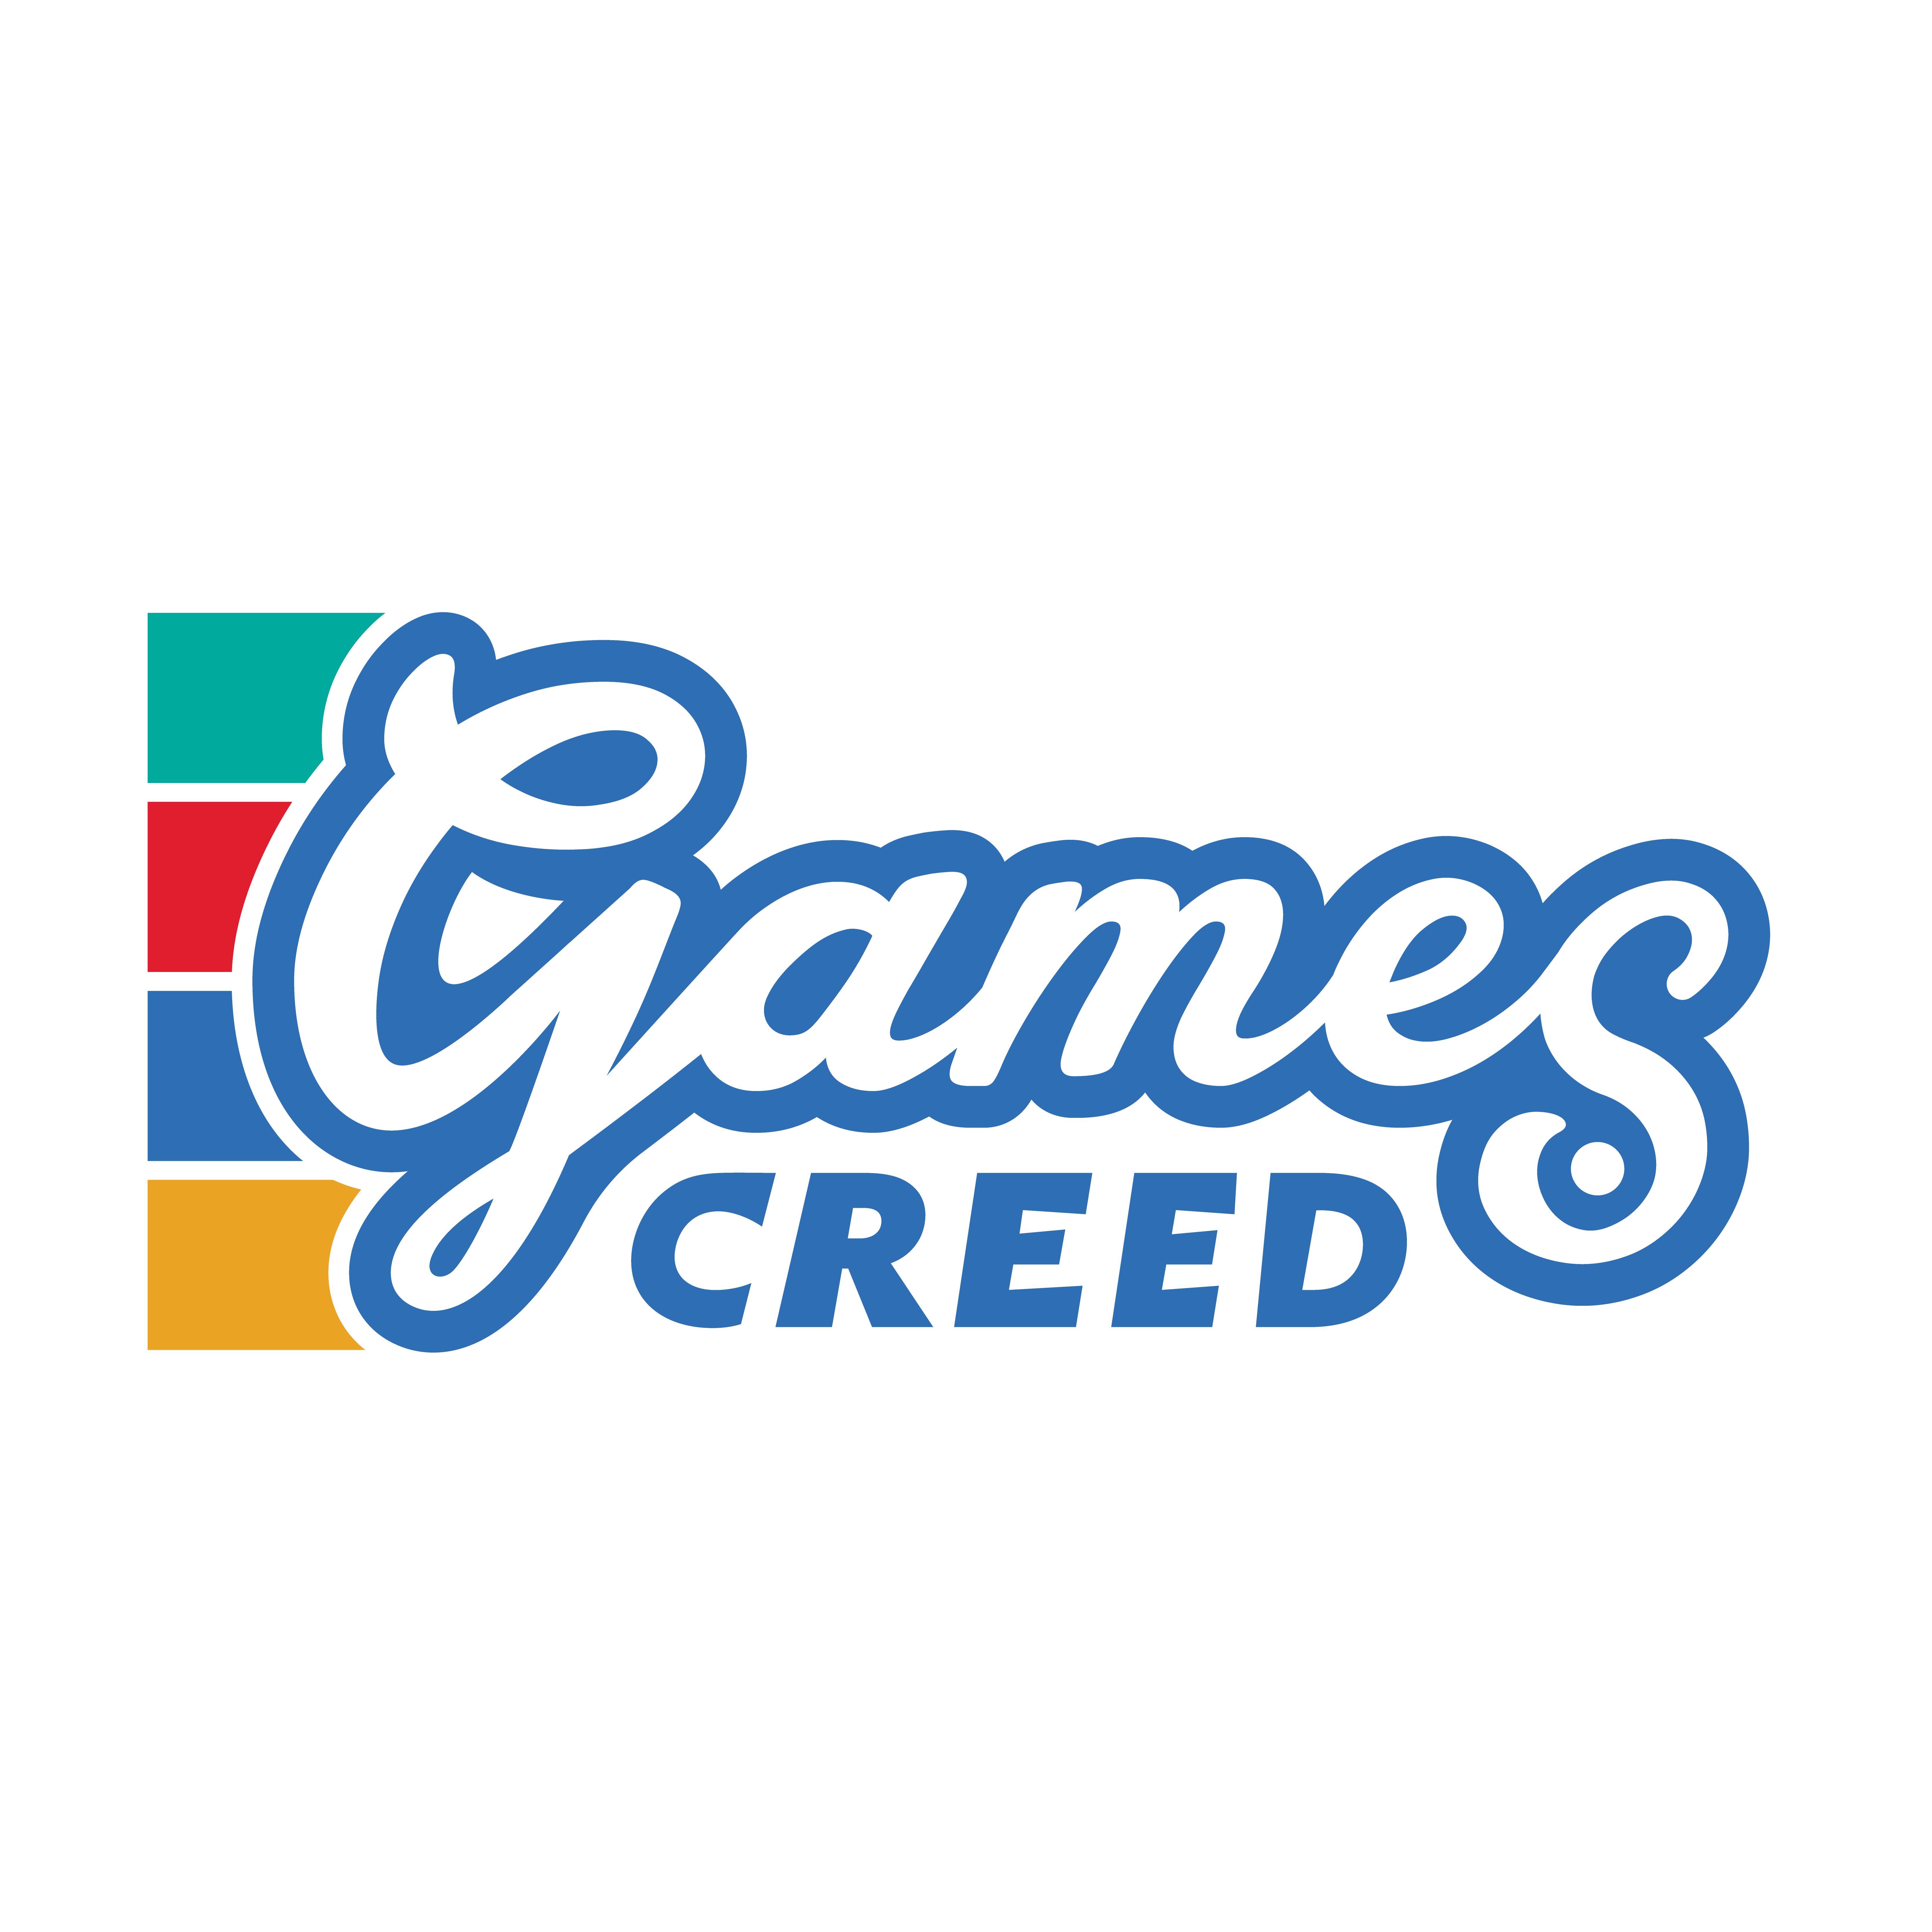 Article about GamesCreed - Video Game News & Reviews